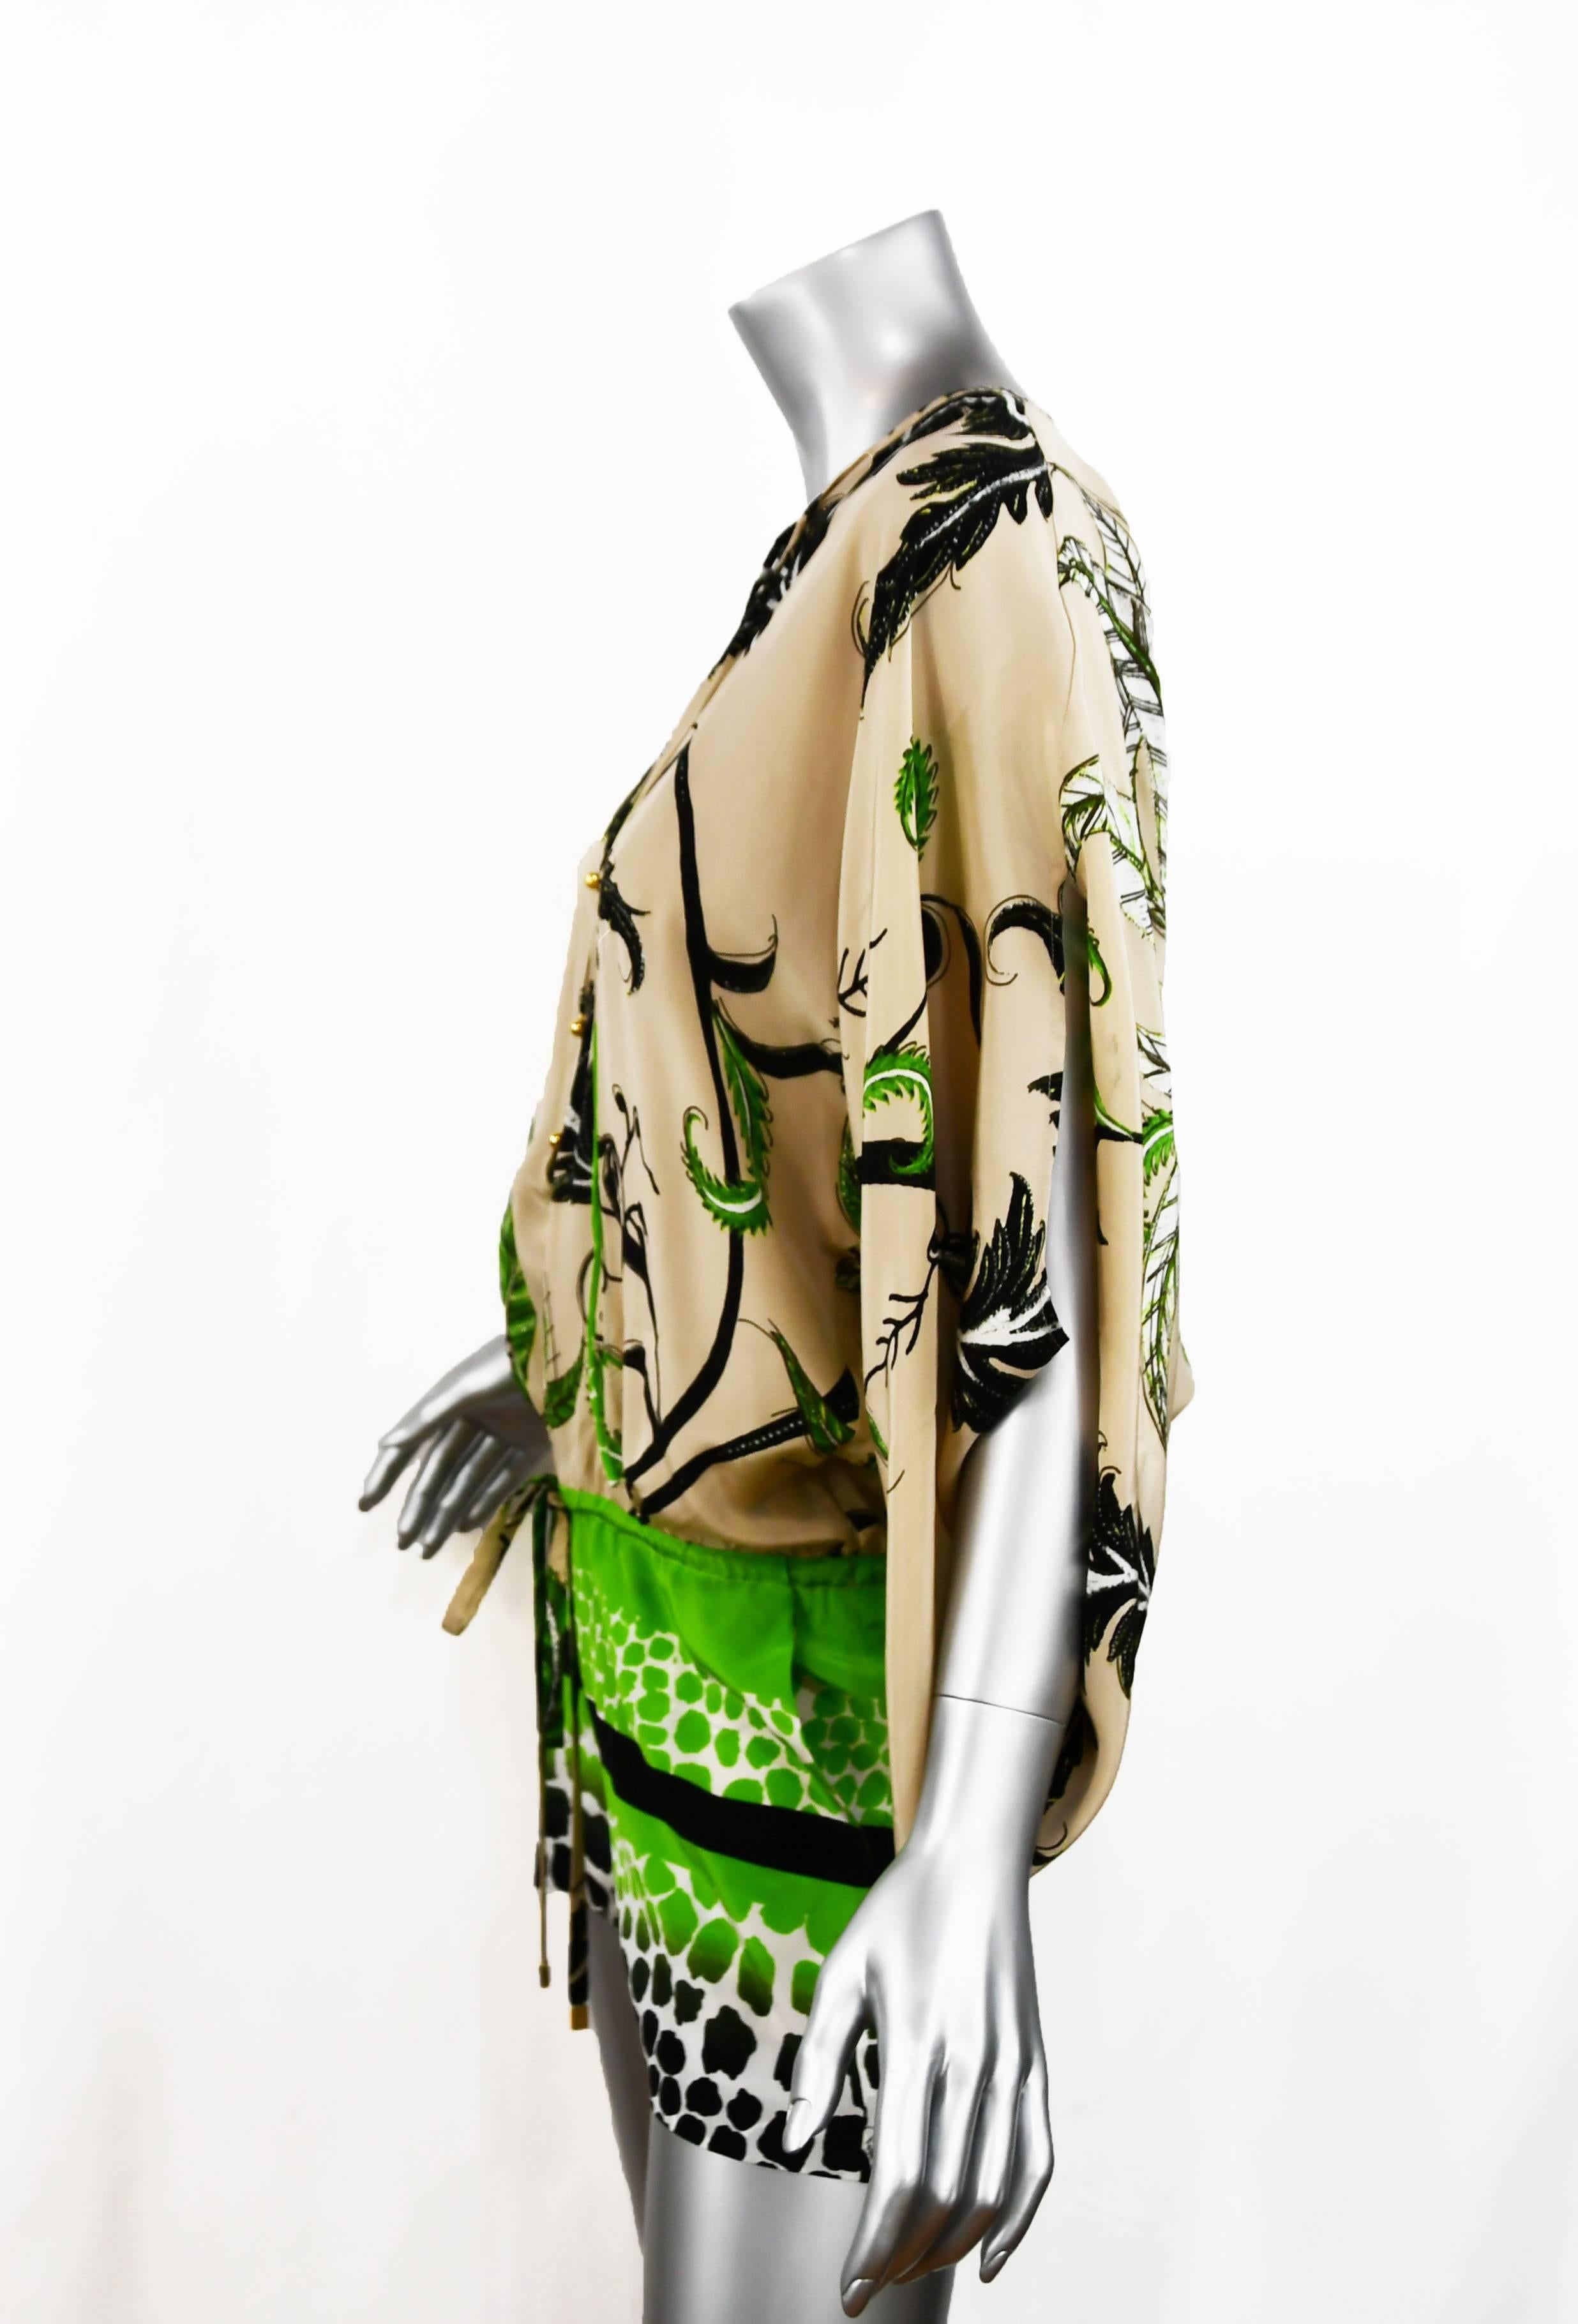 Roberto Cavalli jungle print silk chiffon tunic style short romper with Kimono like sleeves.  Colors of ivory, green and black.  Perfect for resort.  New with tags.  Size 38